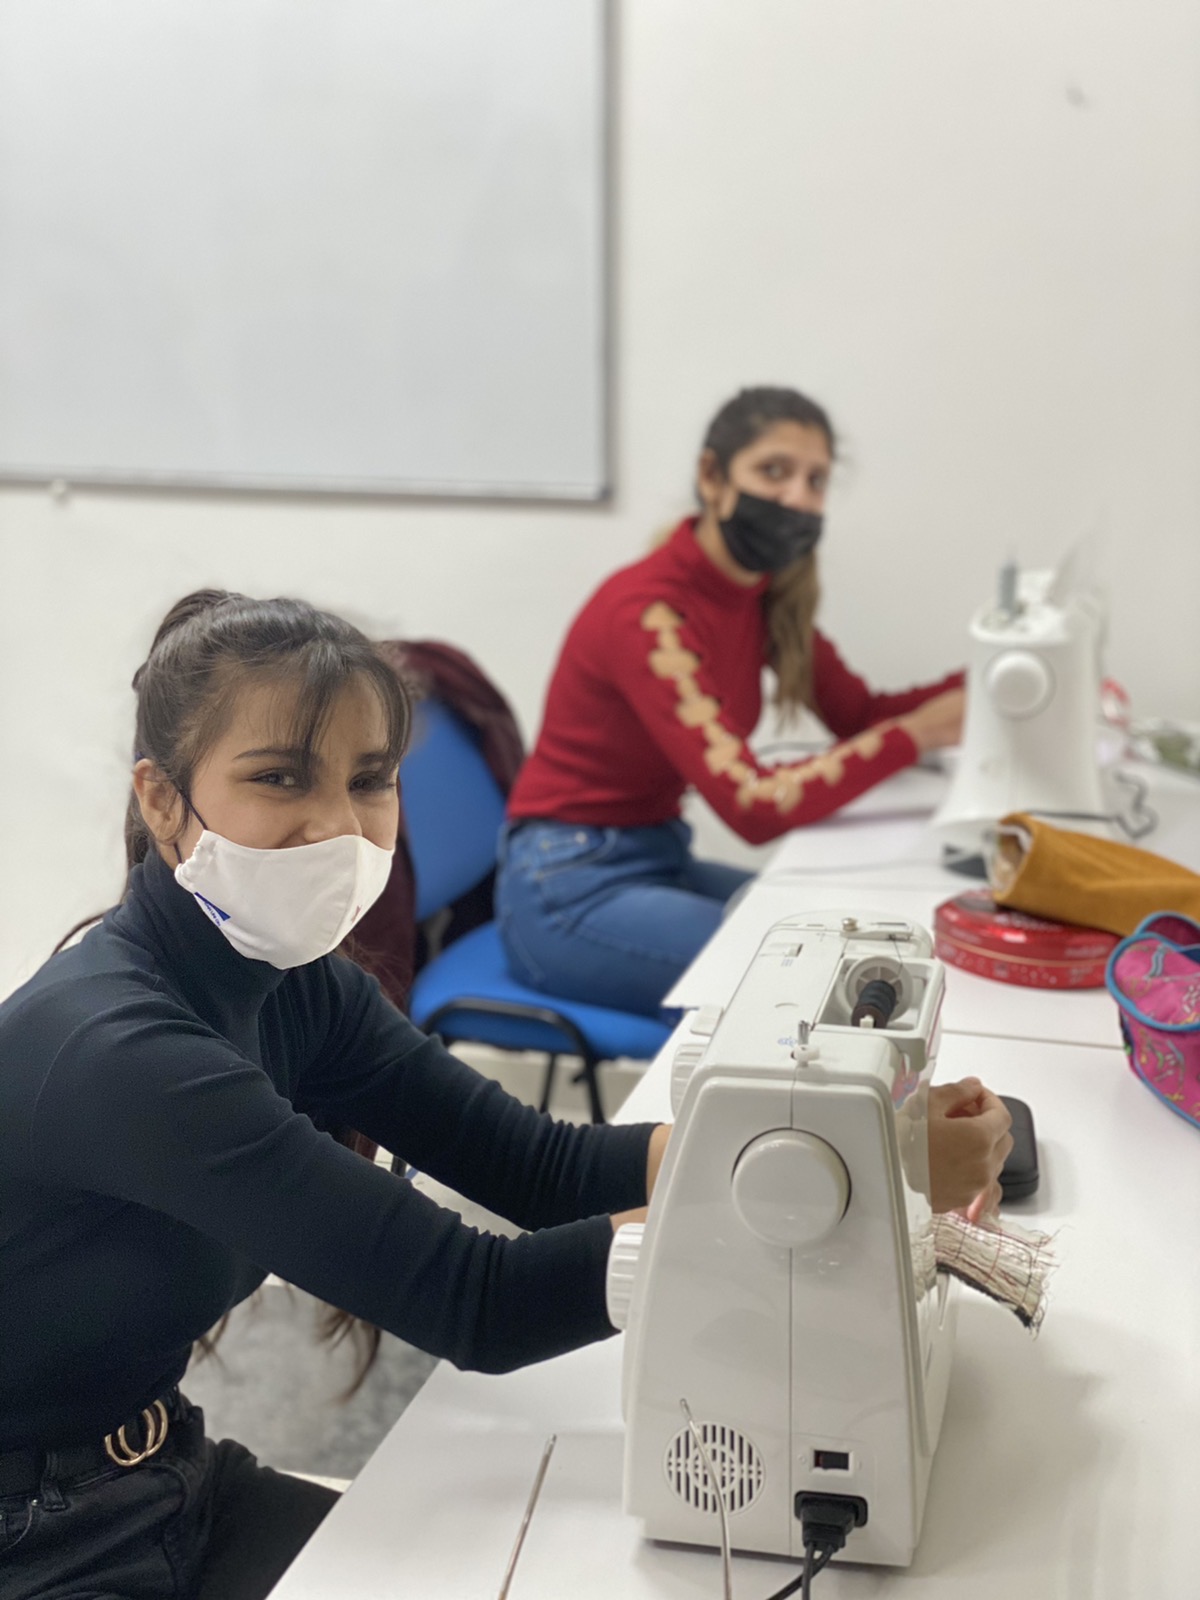 Training for using sewing machines for members of RE population began within the project "Women as carriers of positive social changes"